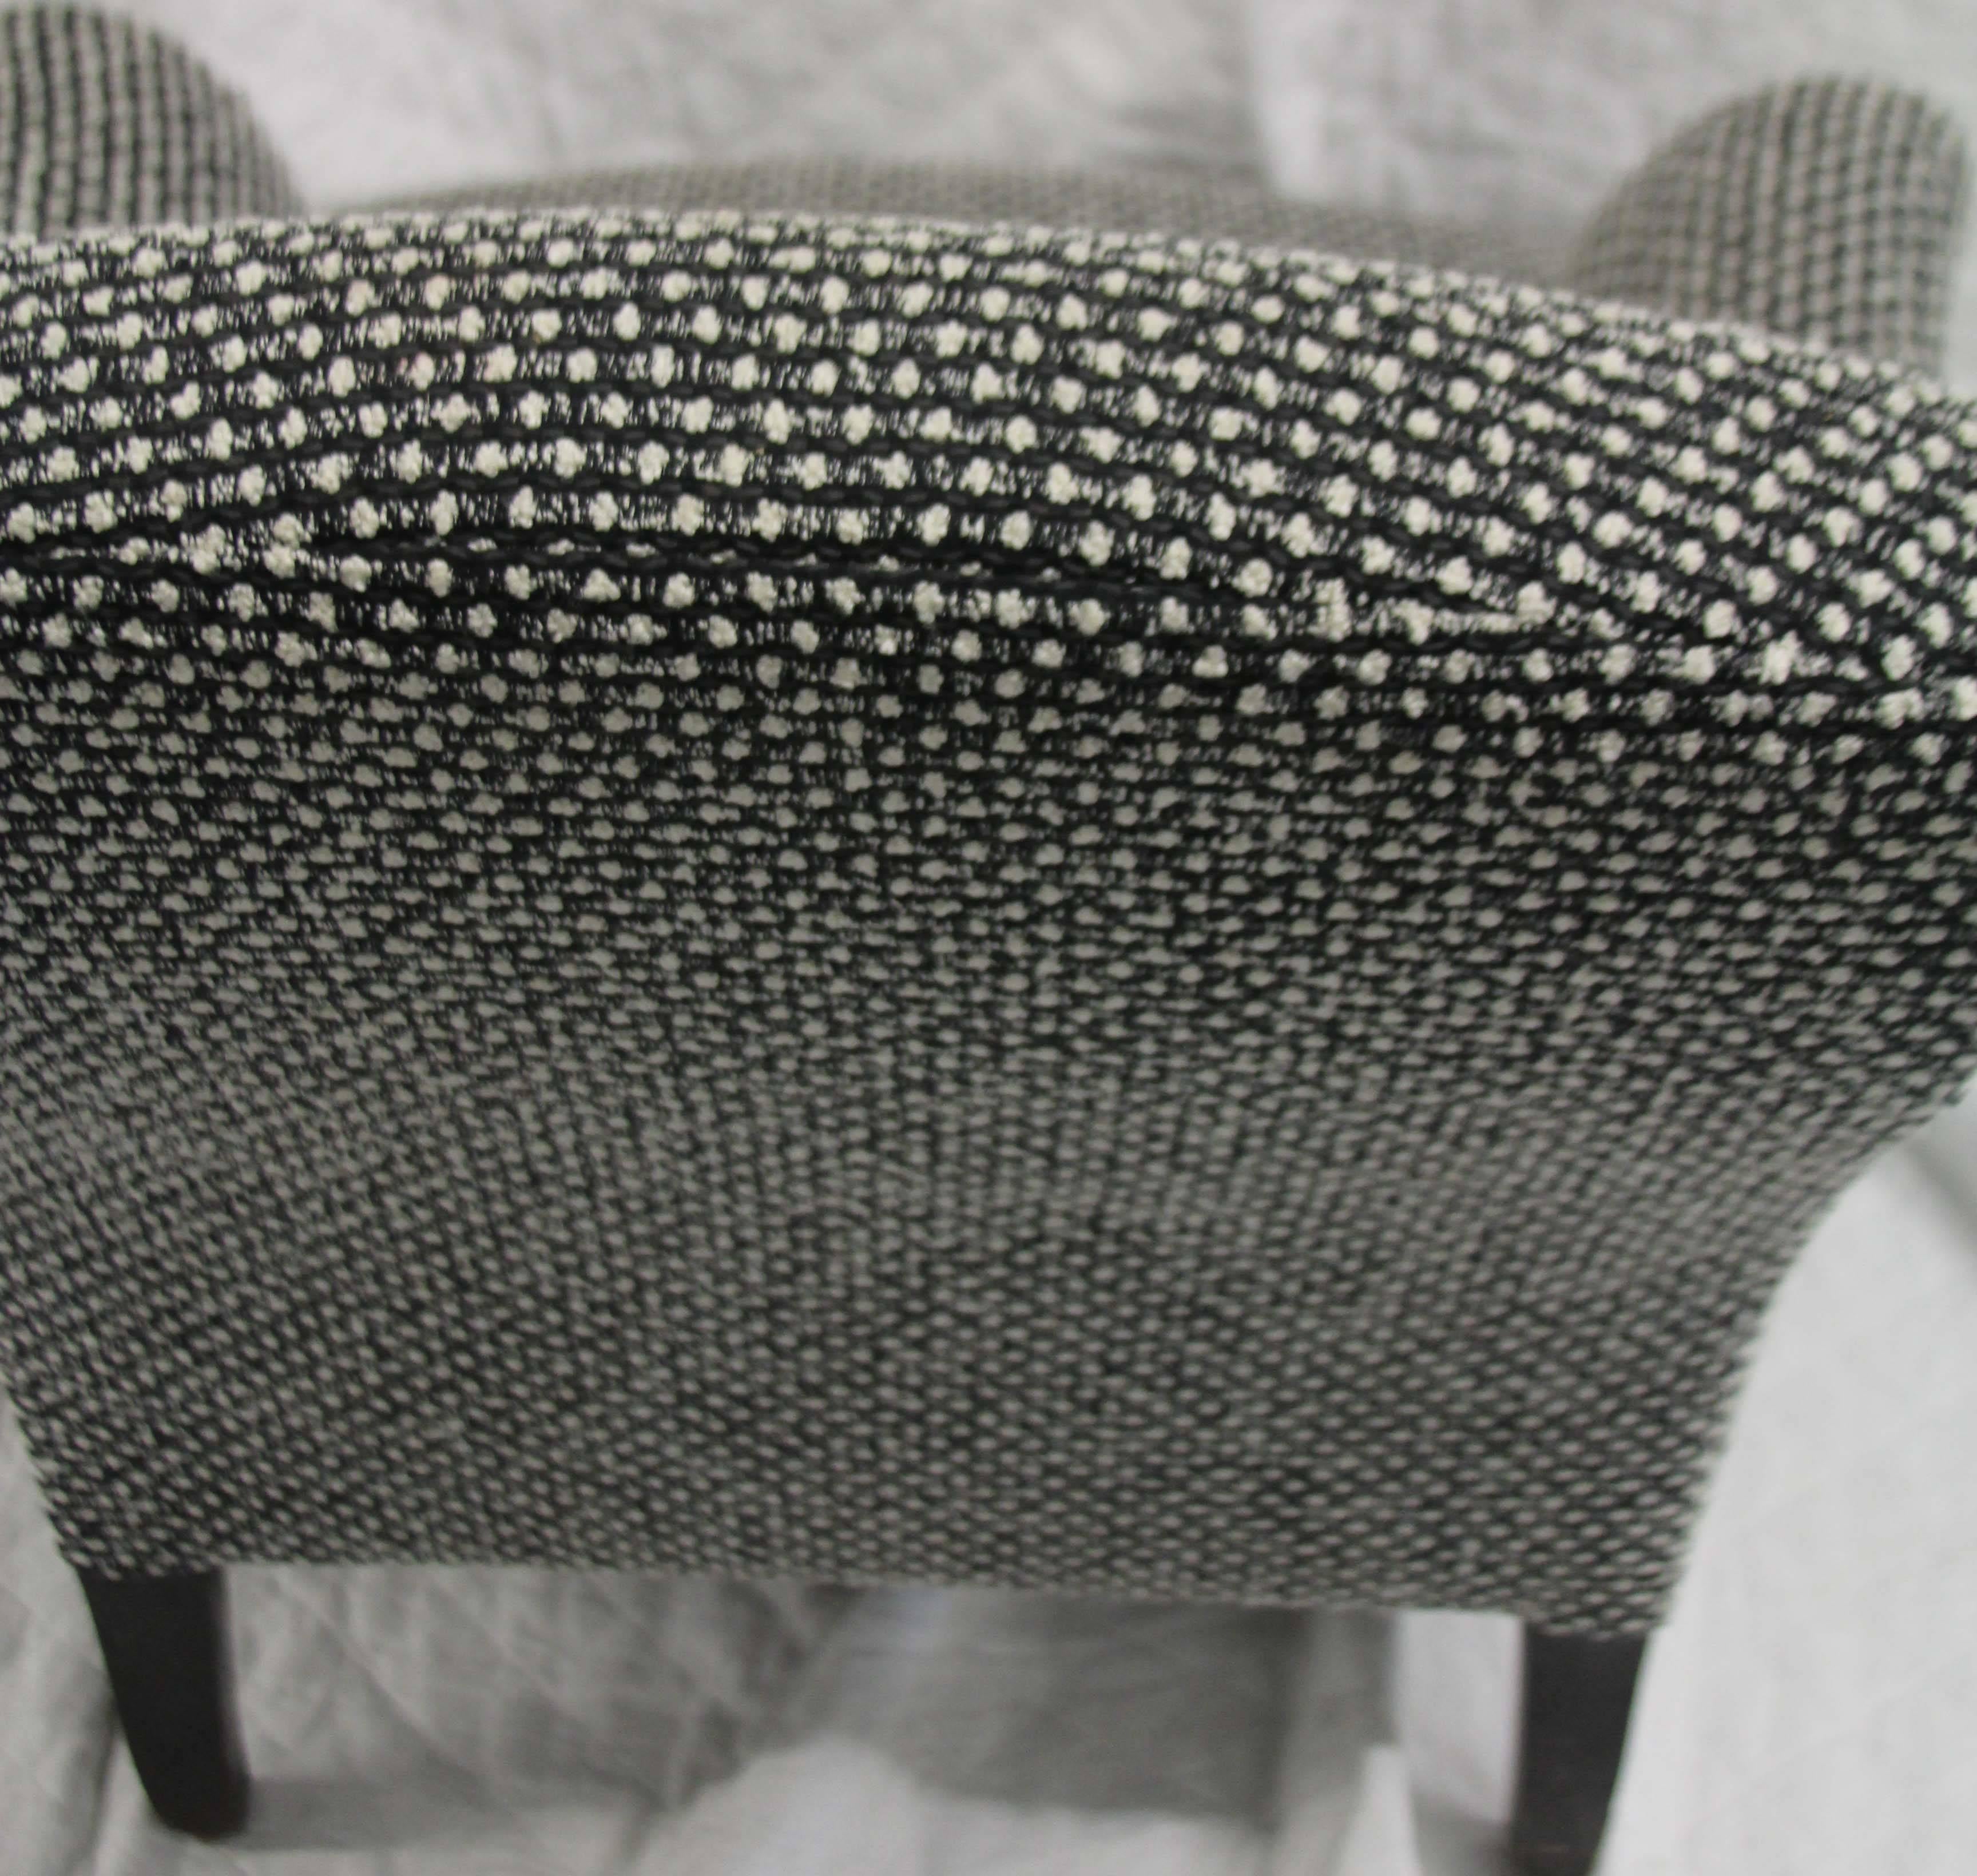 Late 19th Century Classic French Lounge Chair in Black and White Wool Fabric 5